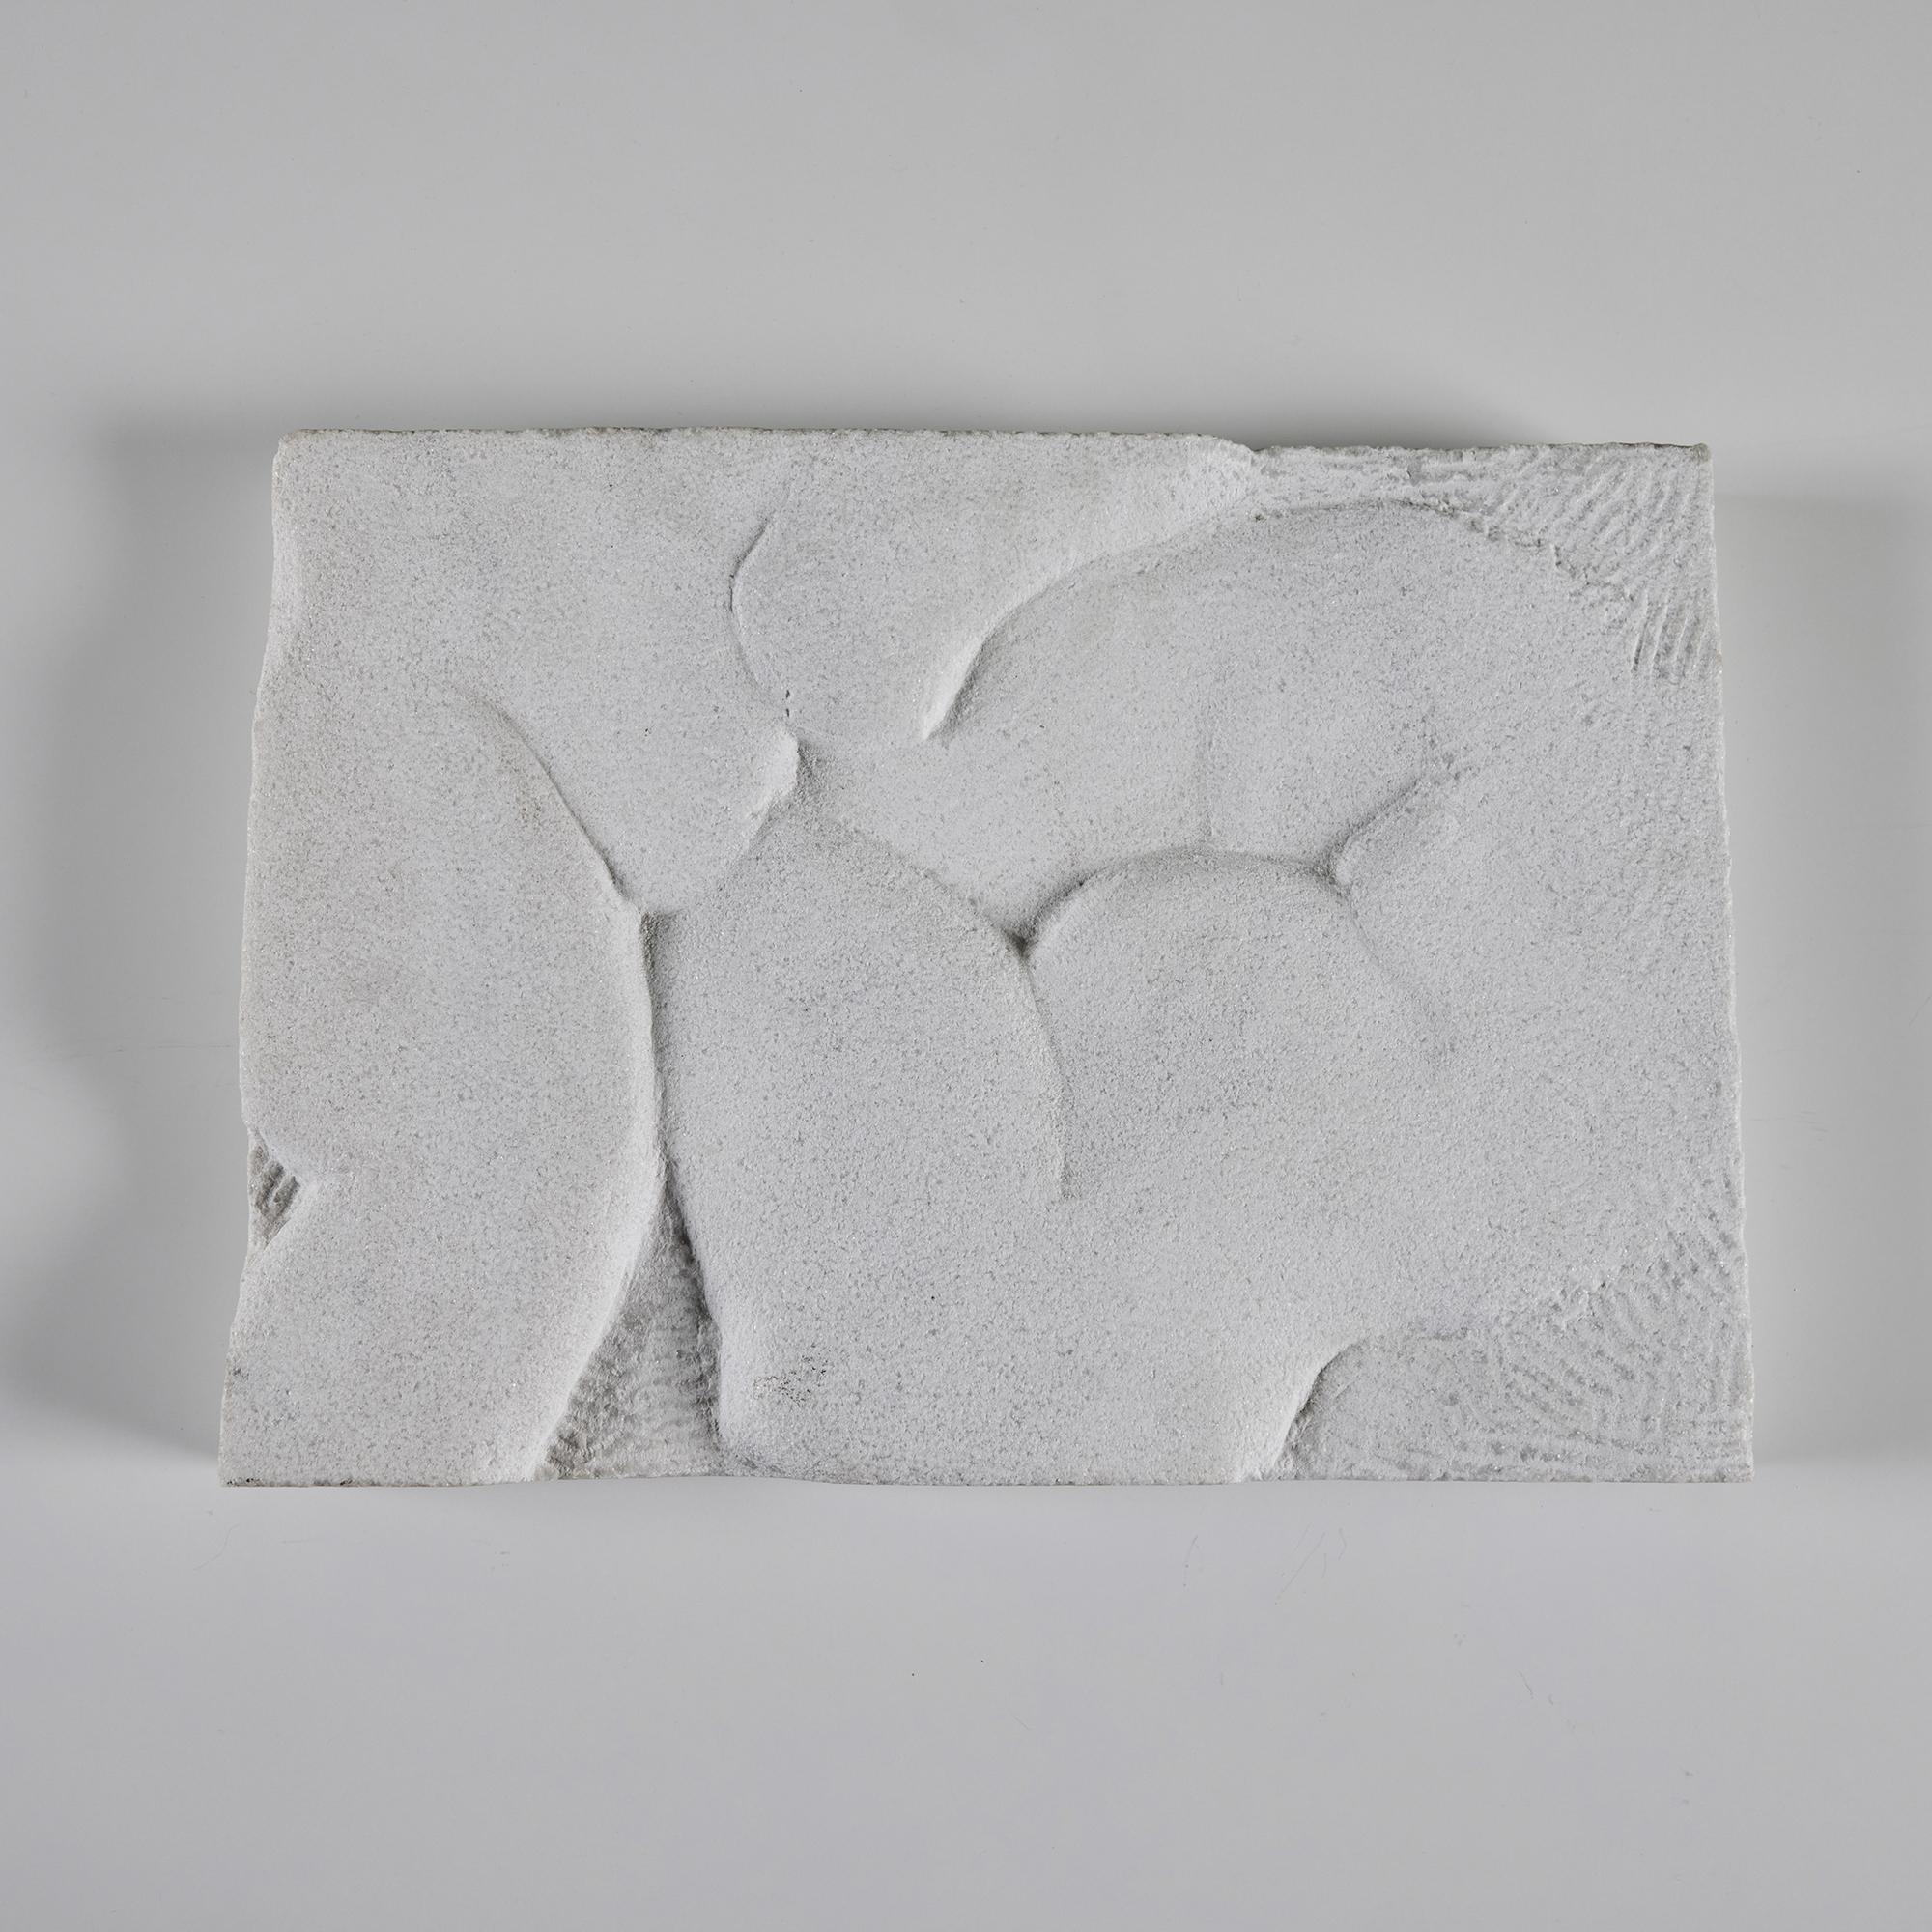 Playful stone stab with textural design. This rectangular slab can easily be displayed on a table or leaning on a shelf. It showcases an abstract design of rounded curves.

Dimensions 
17.5